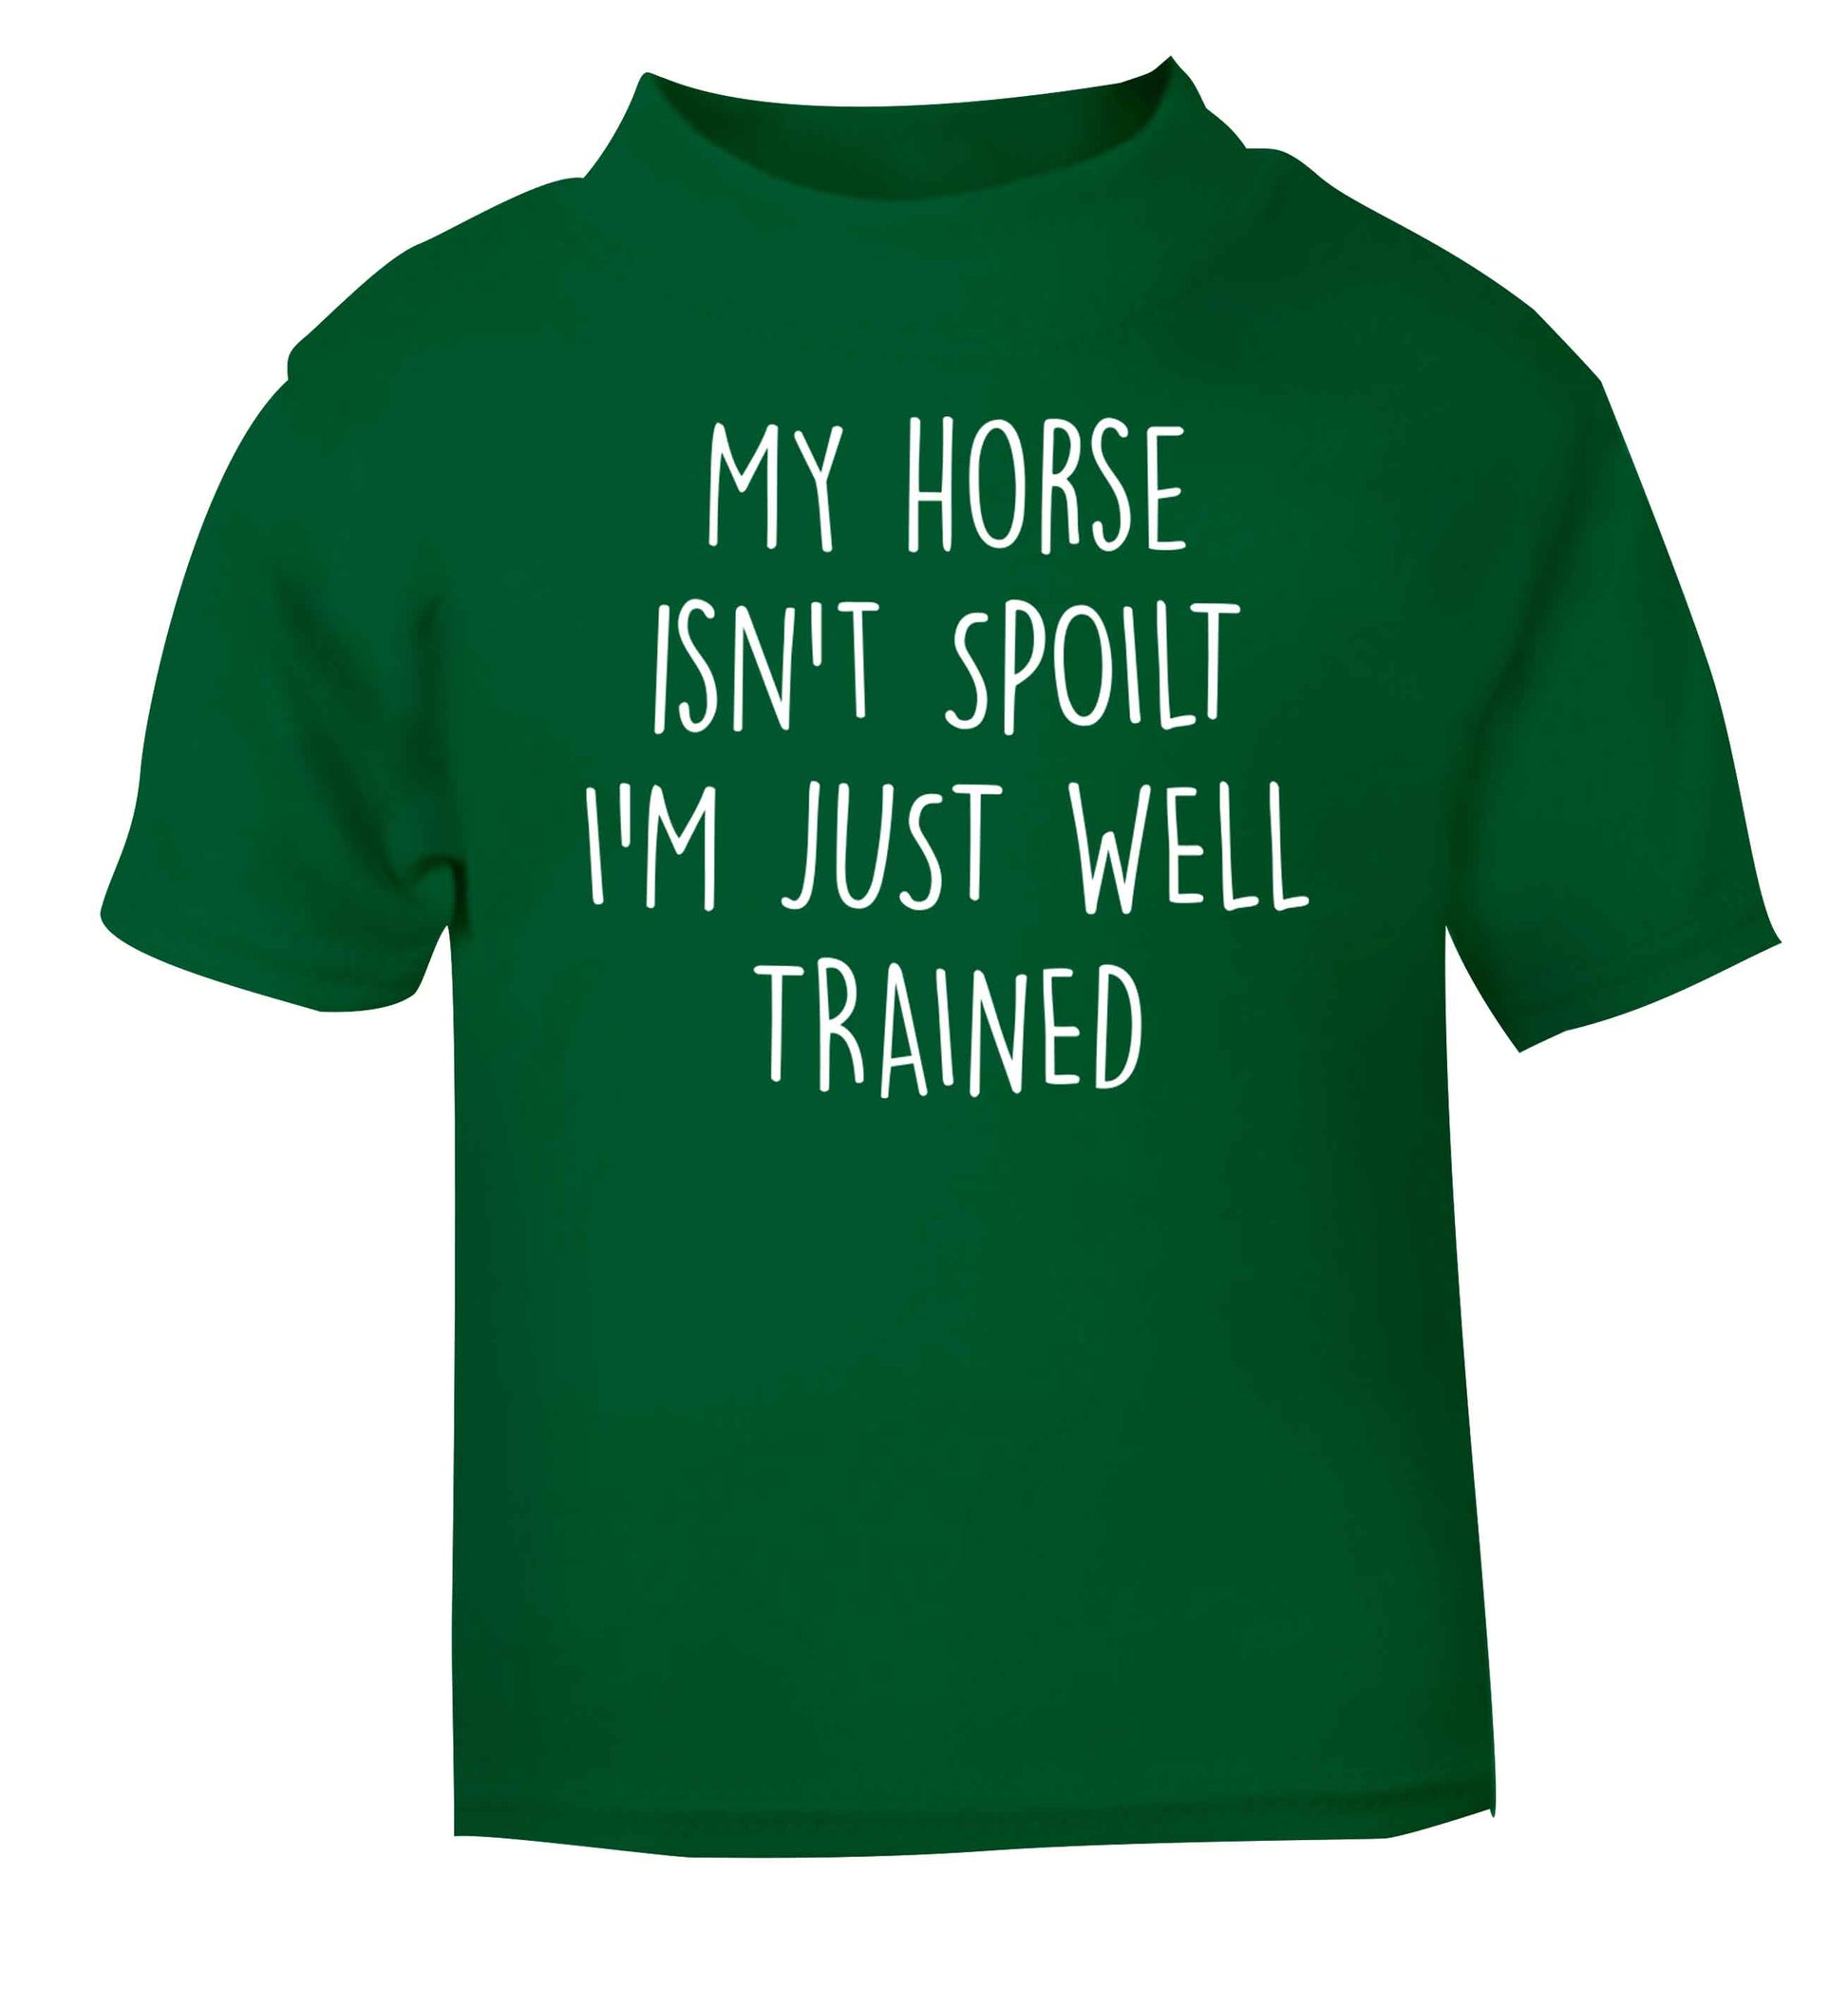 My horse isn't spoilt I'm just well trained green baby toddler Tshirt 2 Years